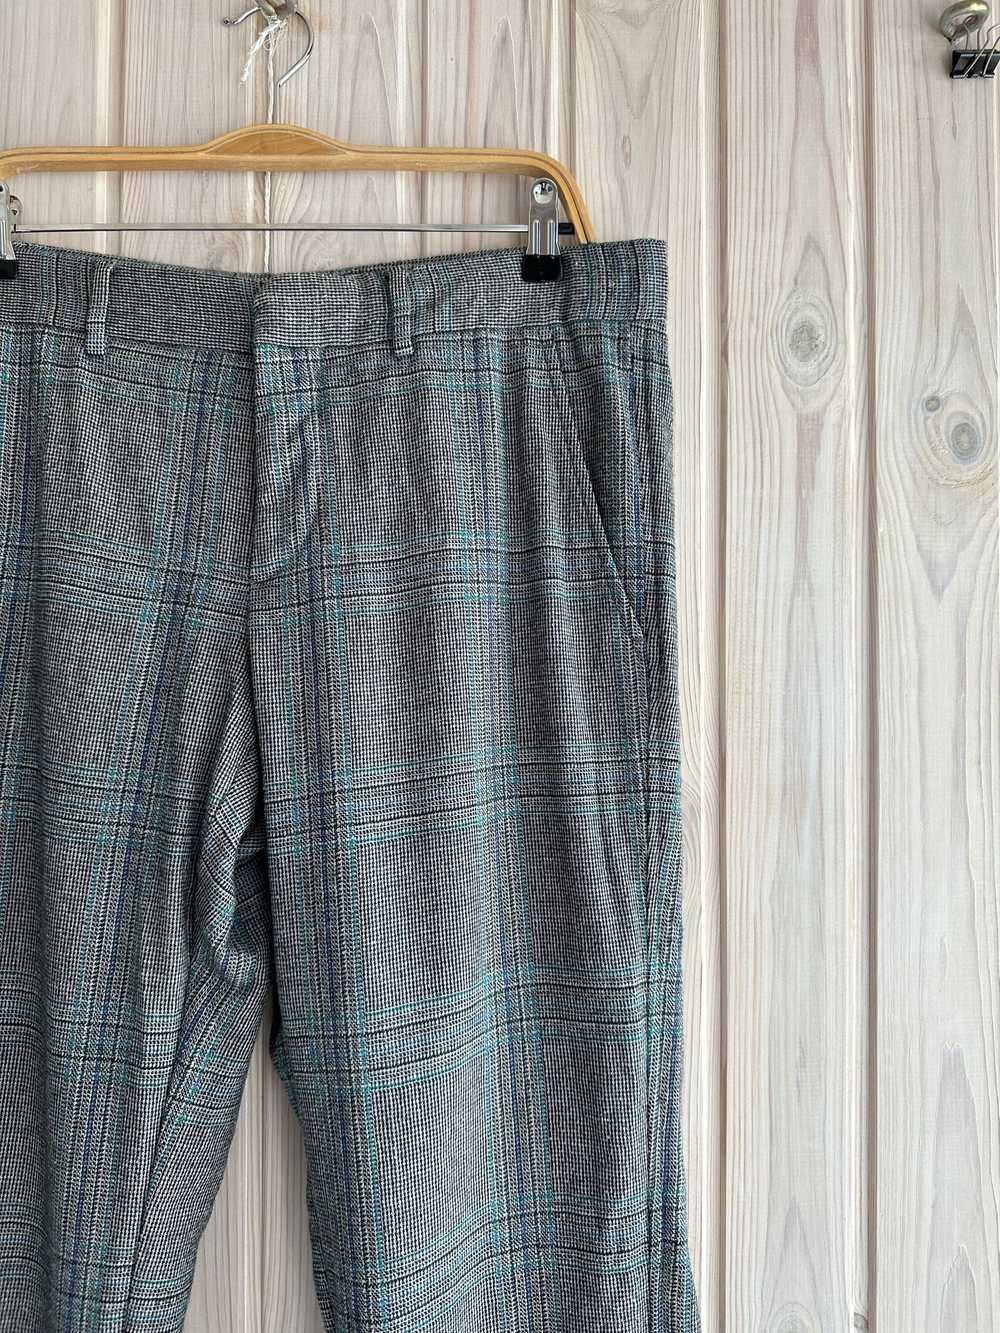 Gucci GUCCI Wool Mohair Plaid Check Trousers - image 2